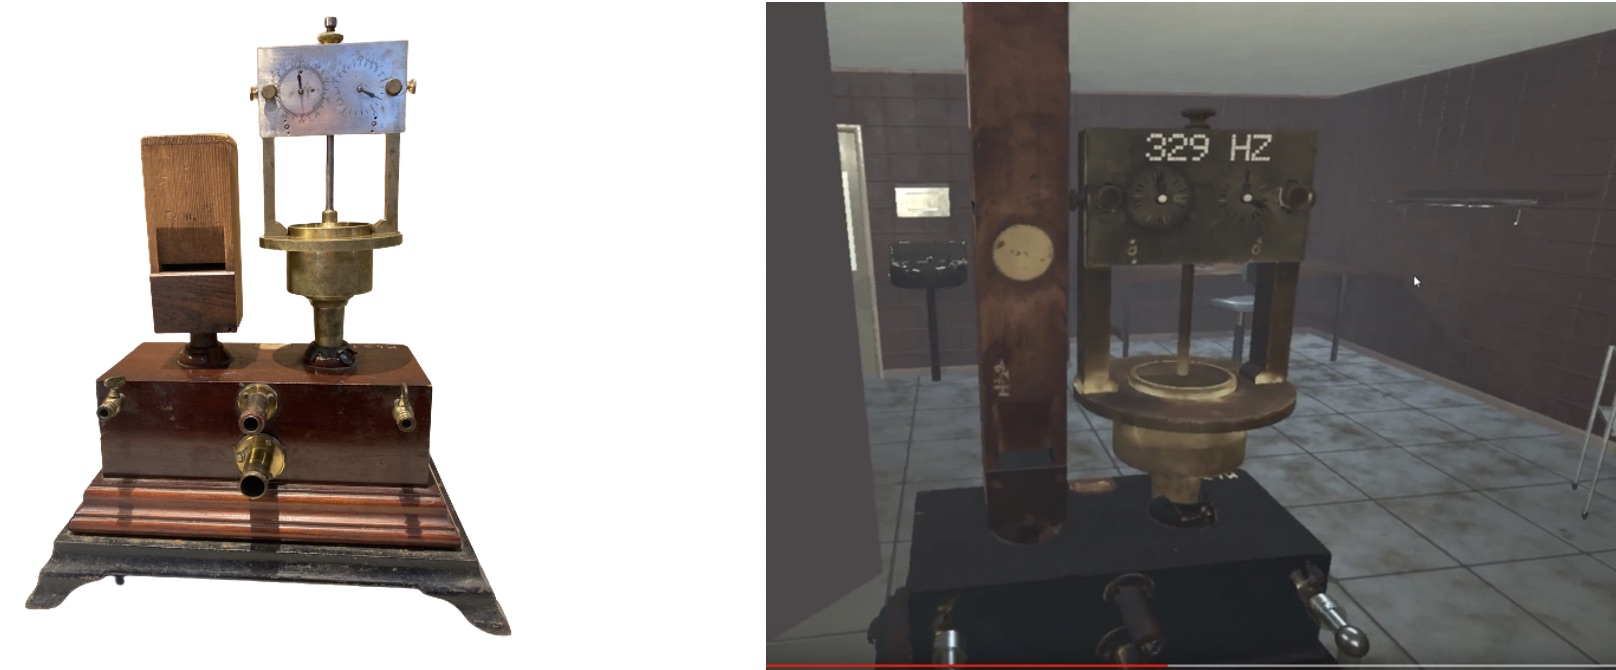 Left: the real Siren. Right: the siren in VR.